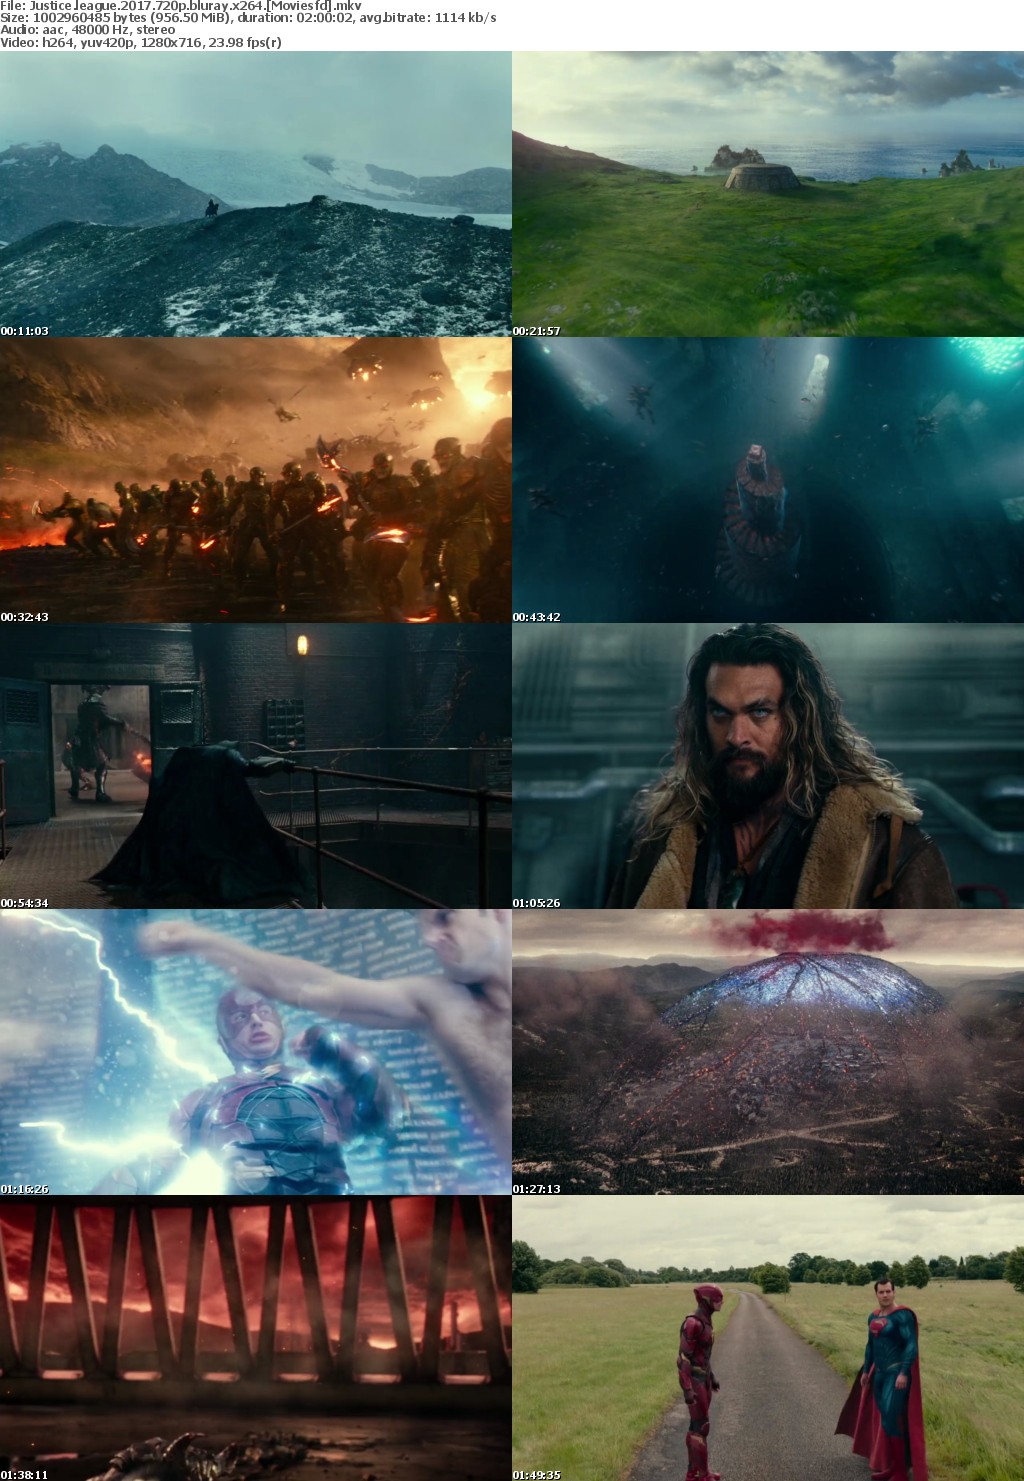 Justice League (2017) 720p BluRay x264 - MoviesFD